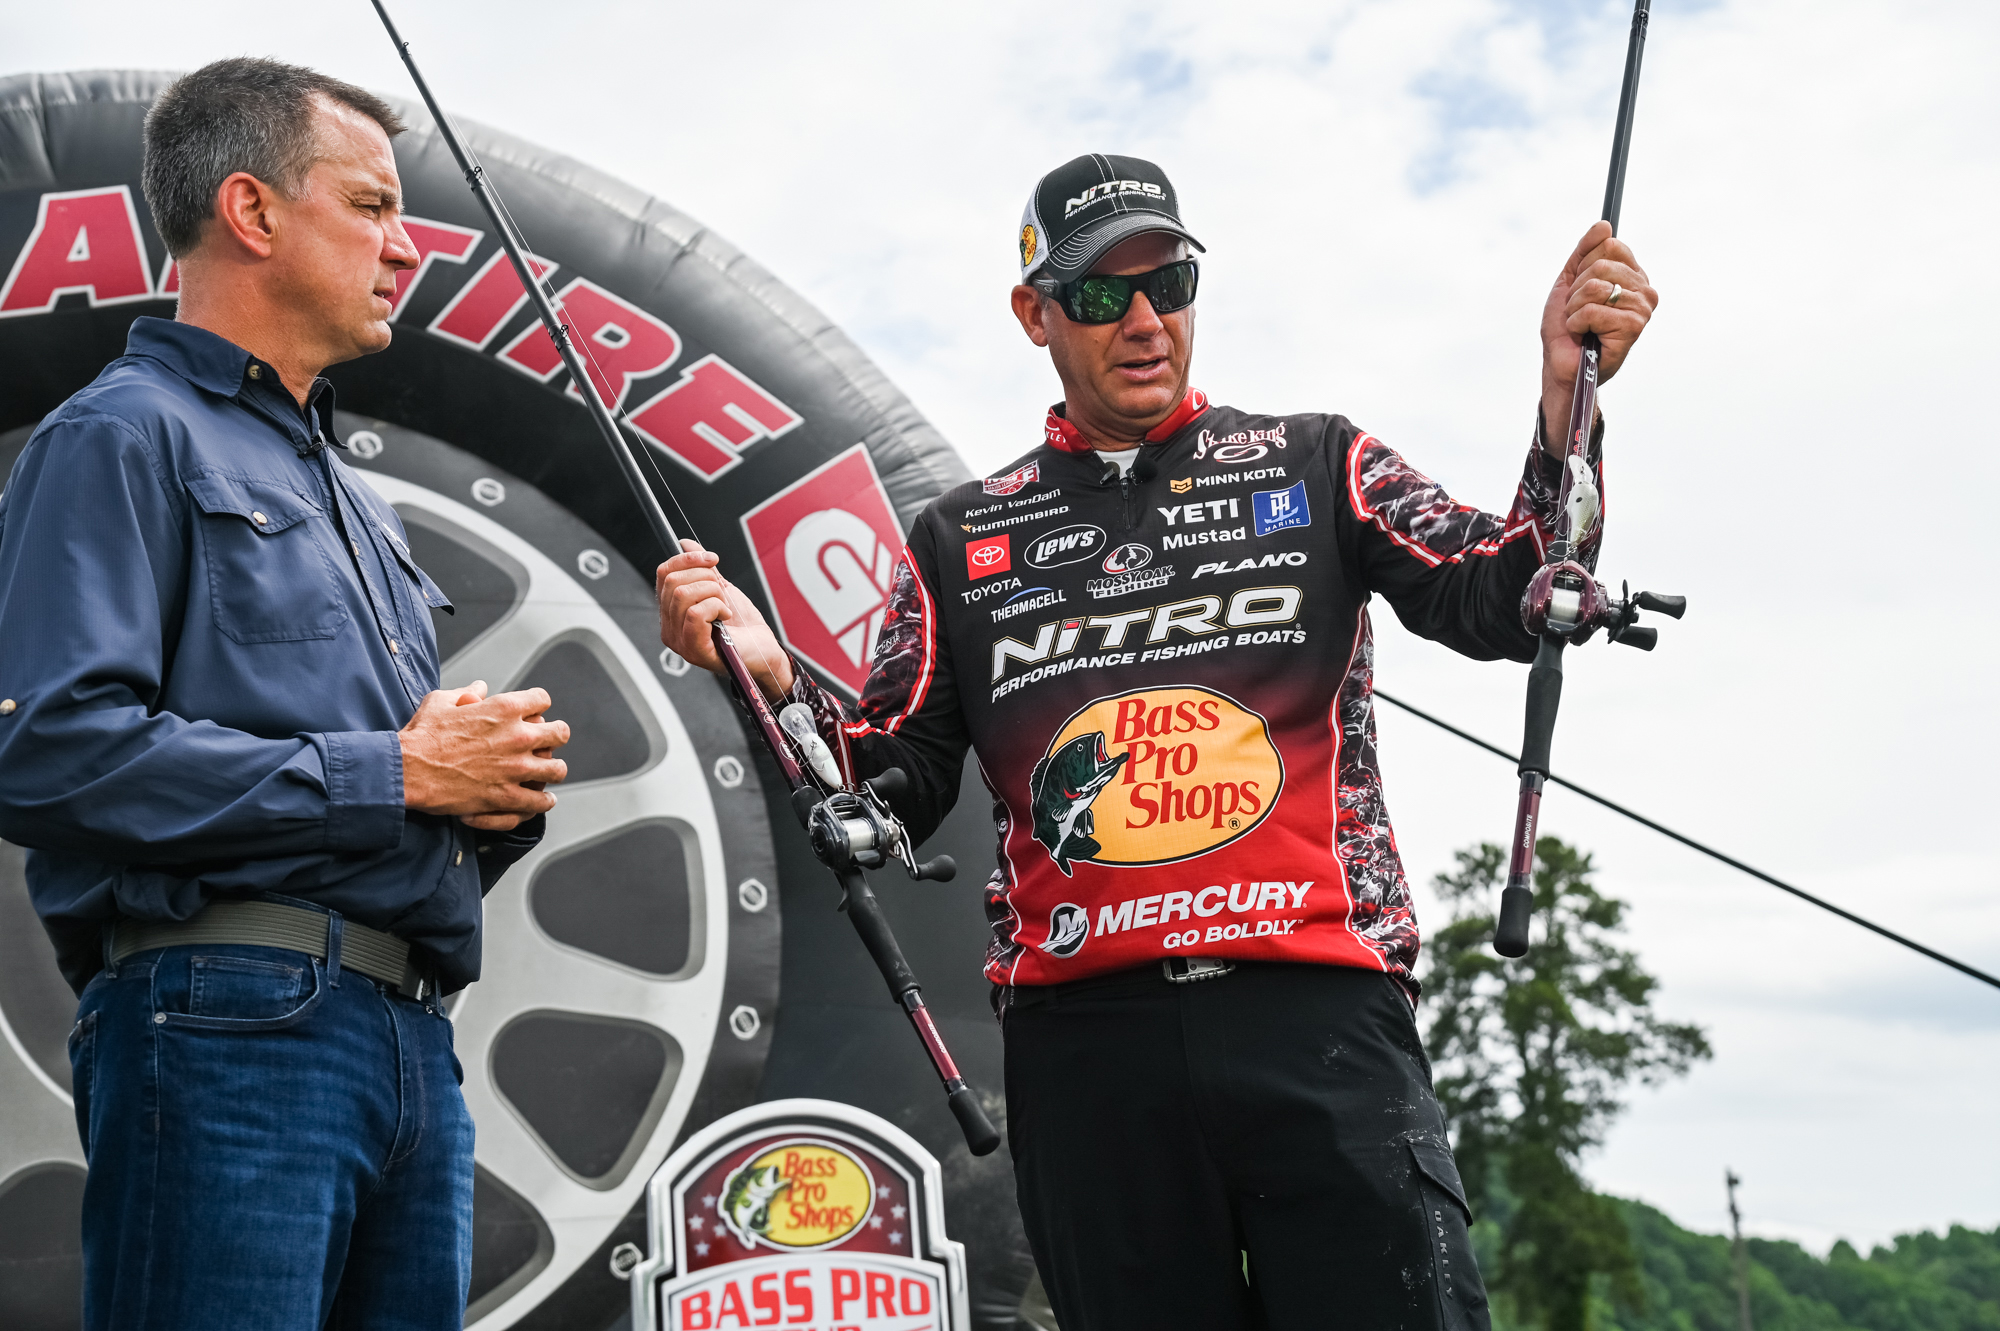 KEVIN VANDAM: 'It's the most wonderful time of the year' - Major